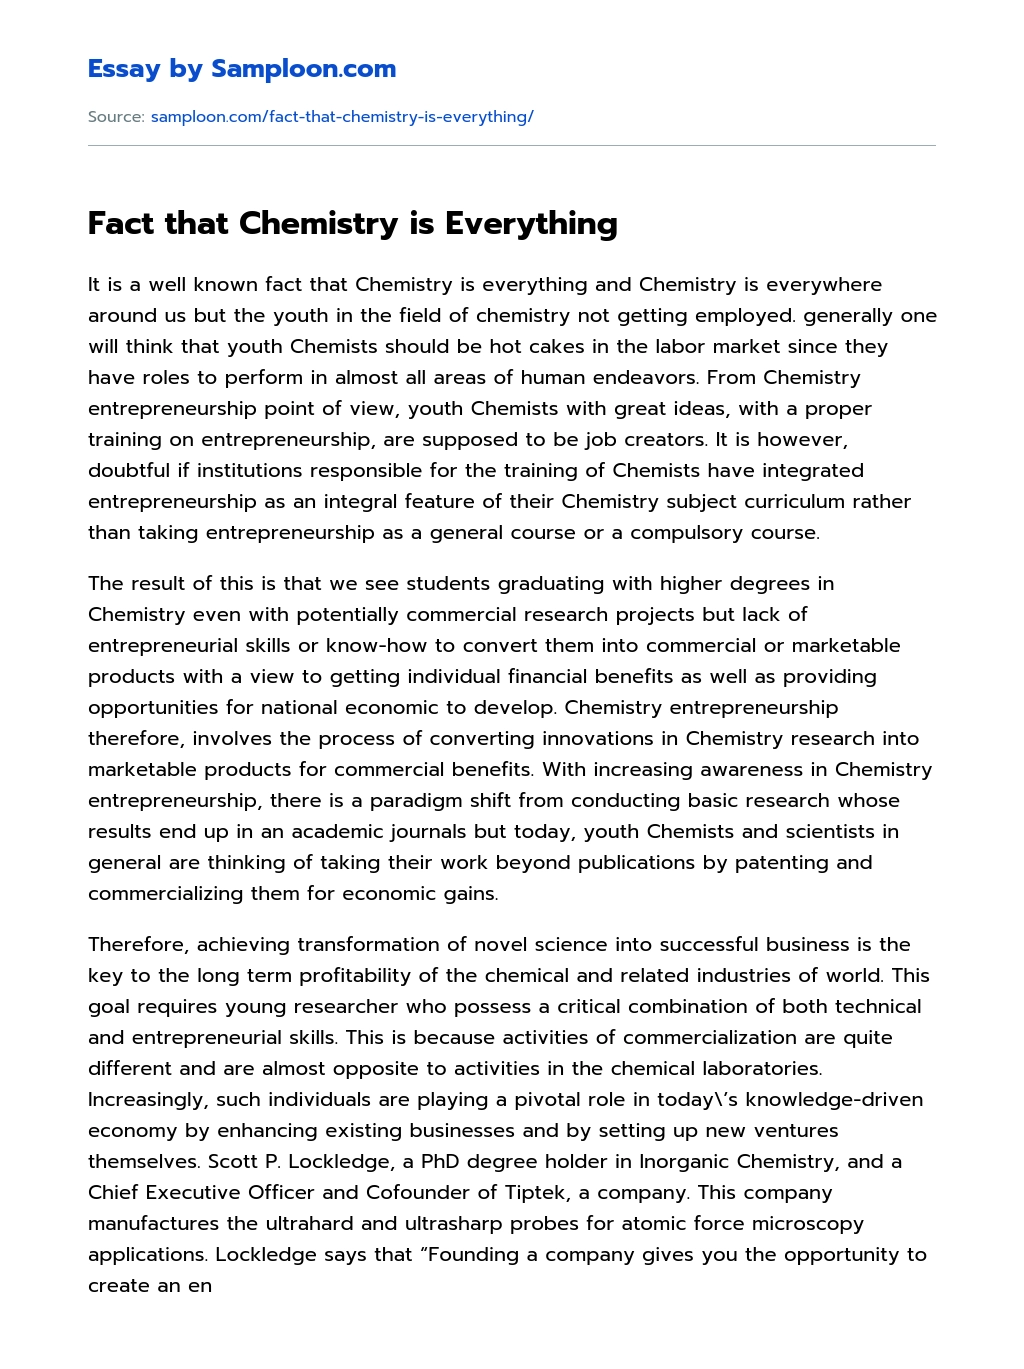 Fact that Chemistry is Everything essay